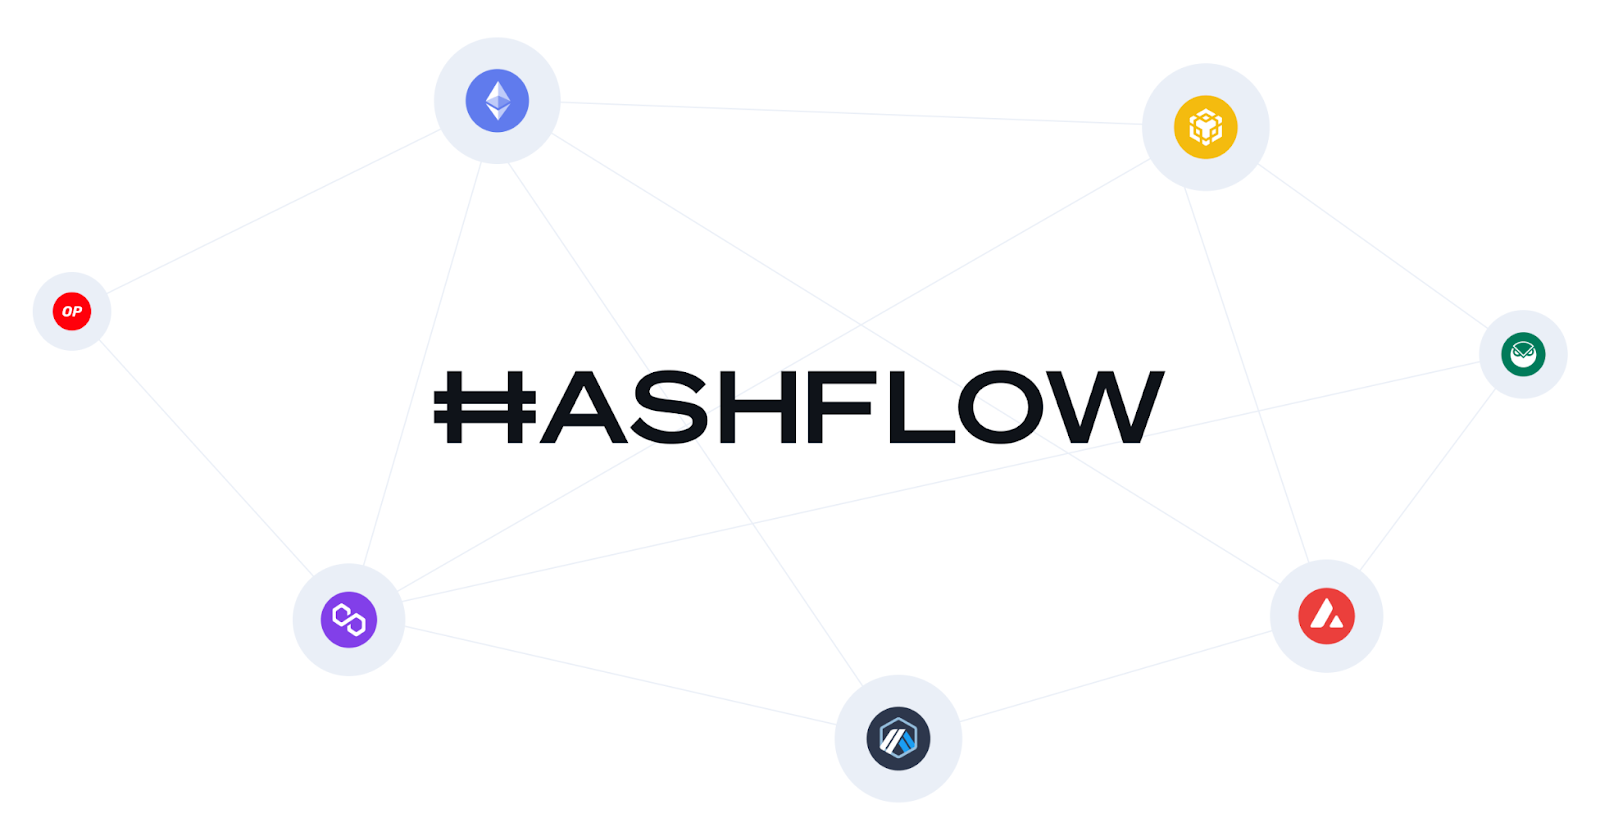 Blog - What is Hashflow?